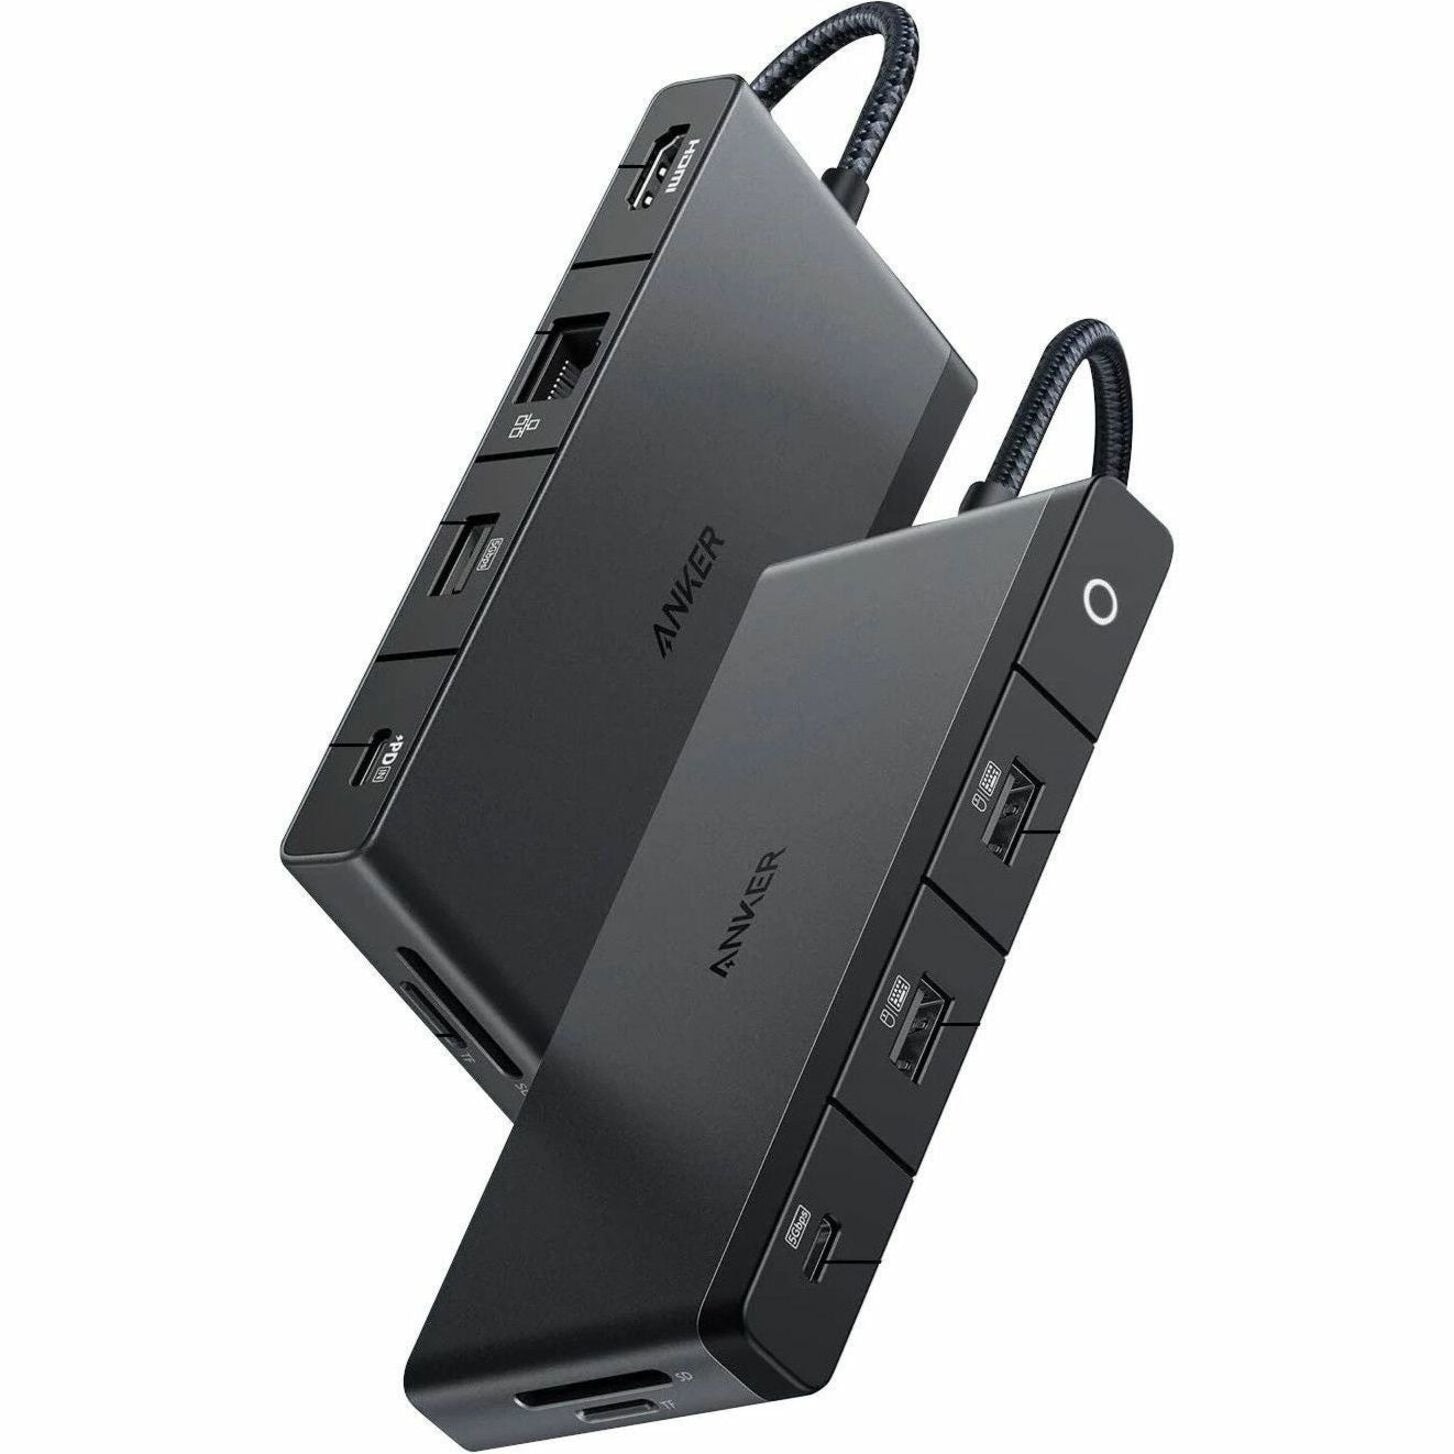 ANKER A8373H11 552 USB-C Hub (9-in-1, 4K HDMI), Power Delivery Pass-through, Gigabit Ethernet, Black